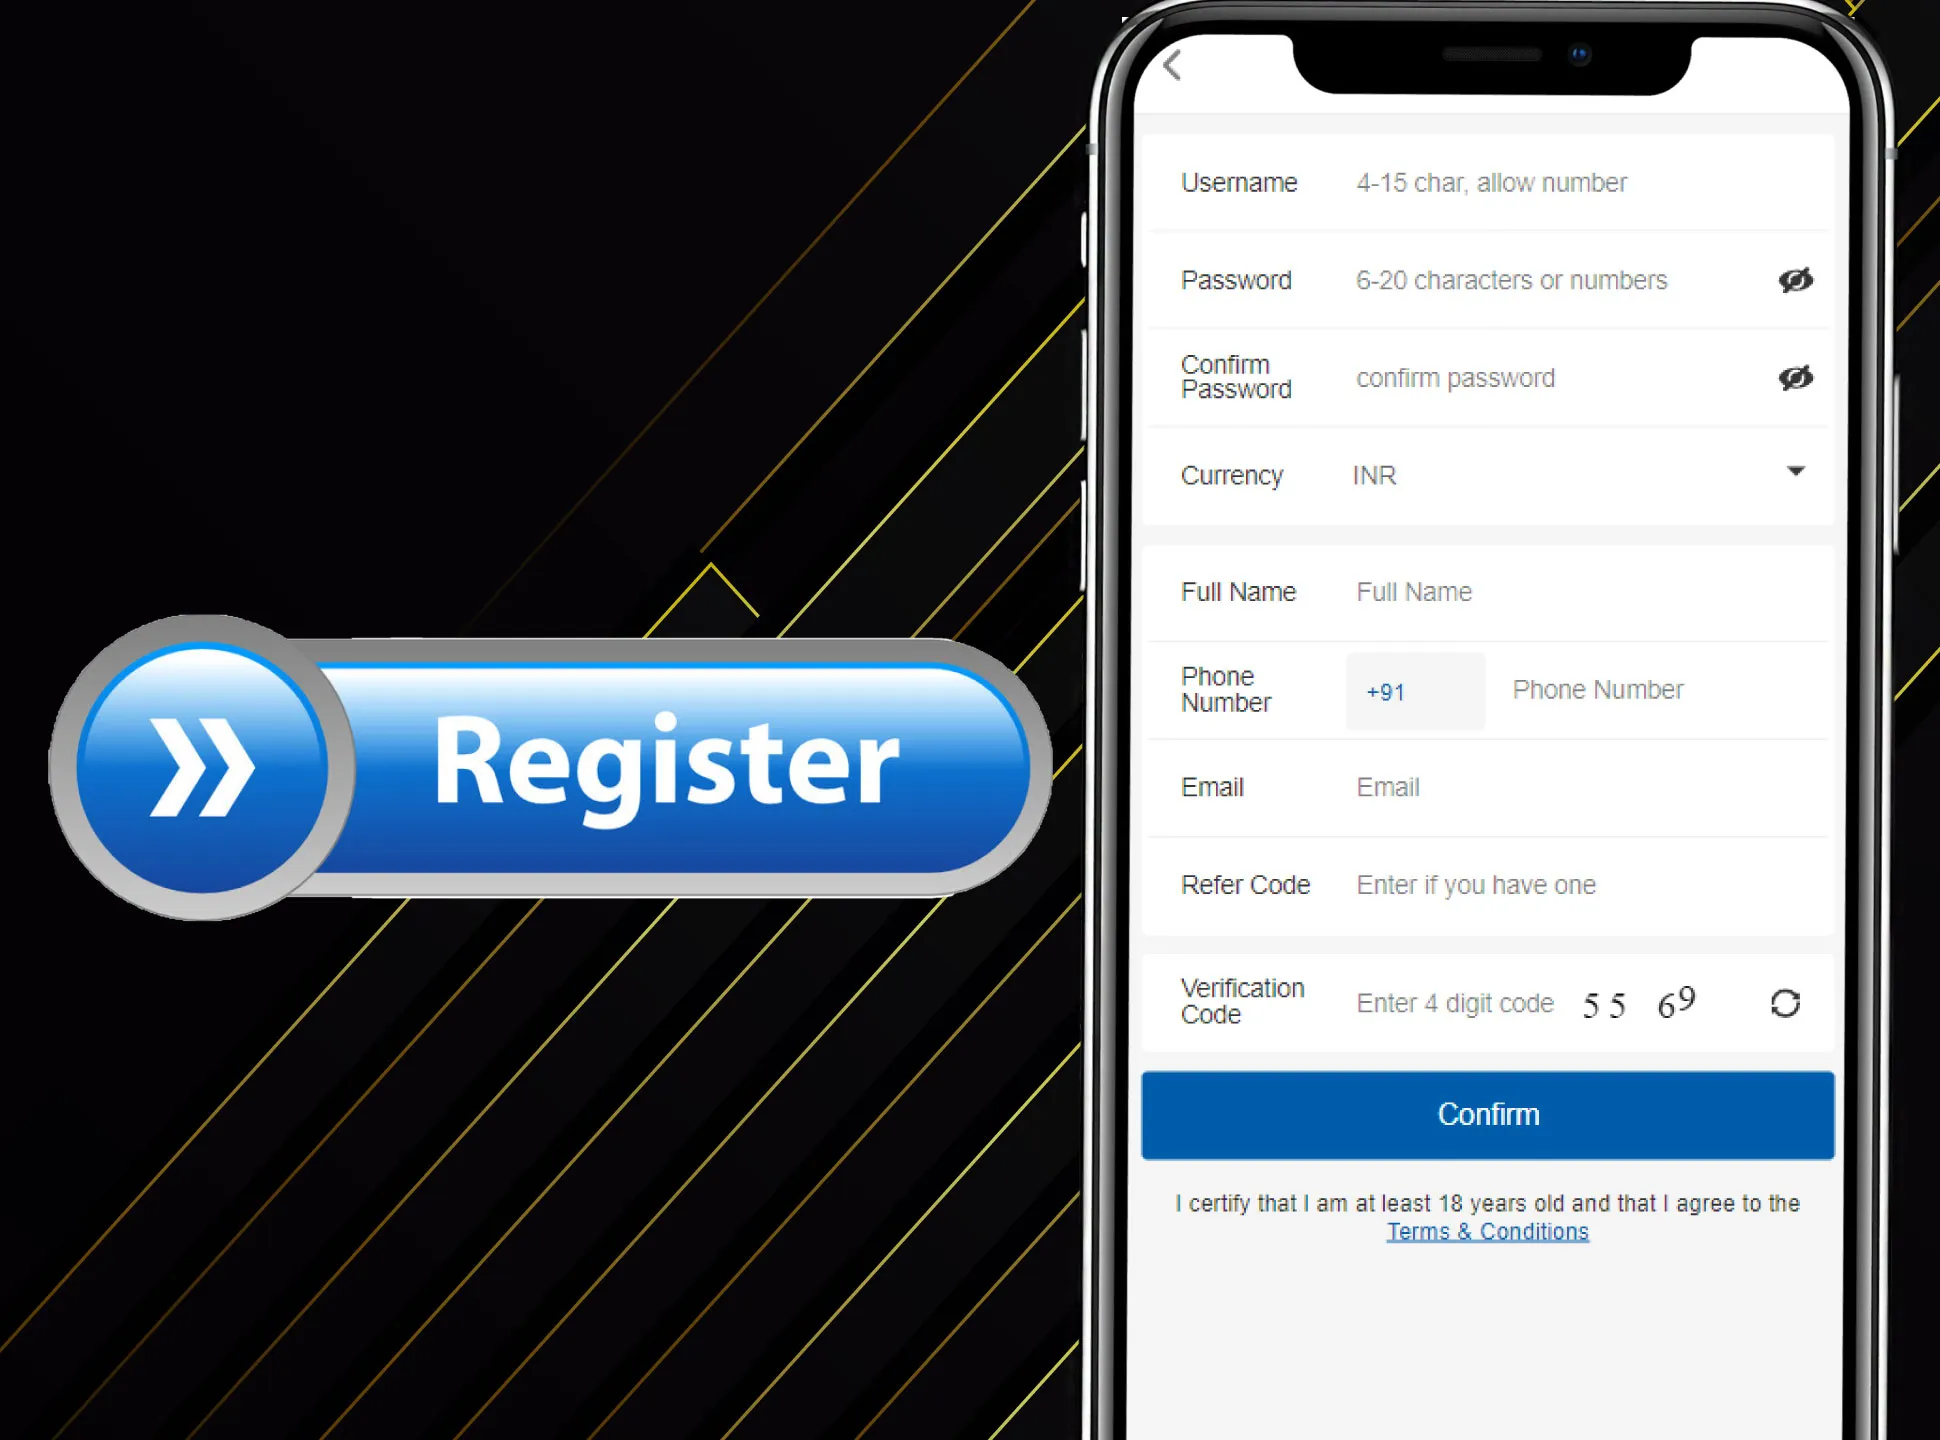 You can create your Crickex account in the mobile app.